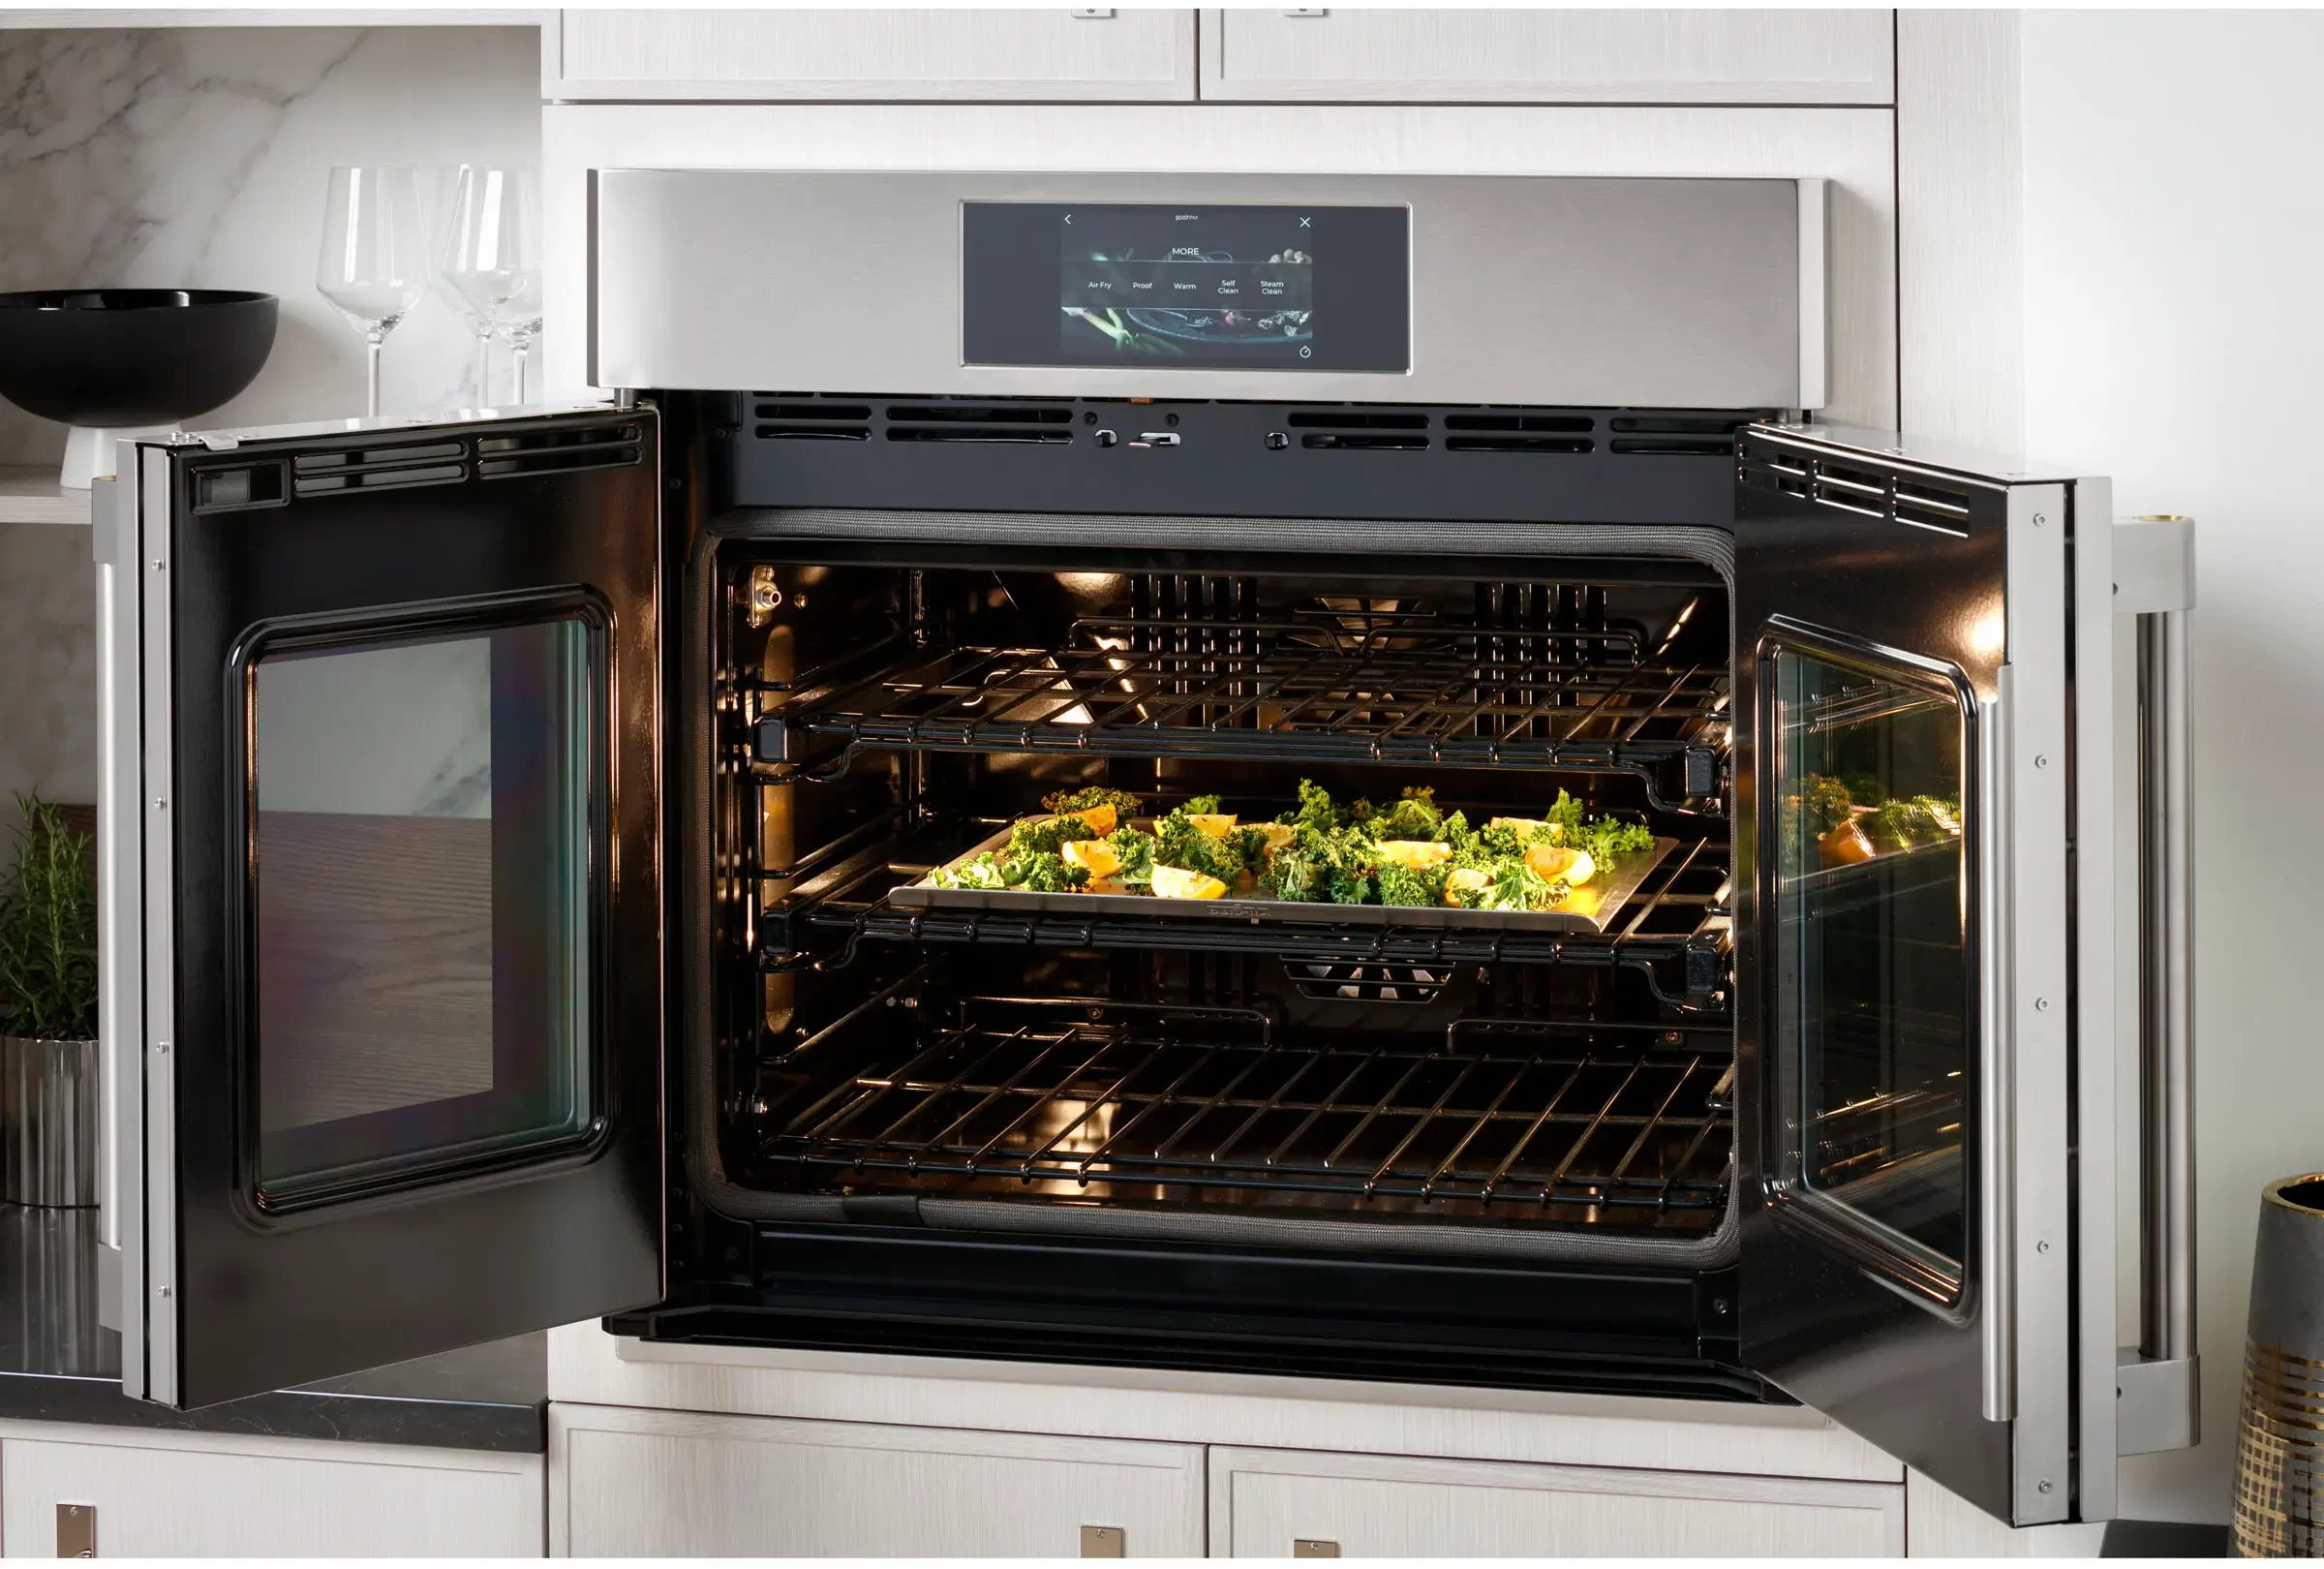 Emerald Enchantment: St. Patrick's Day With Your GE Monogram Ovens | GE Monogram Inc Repair